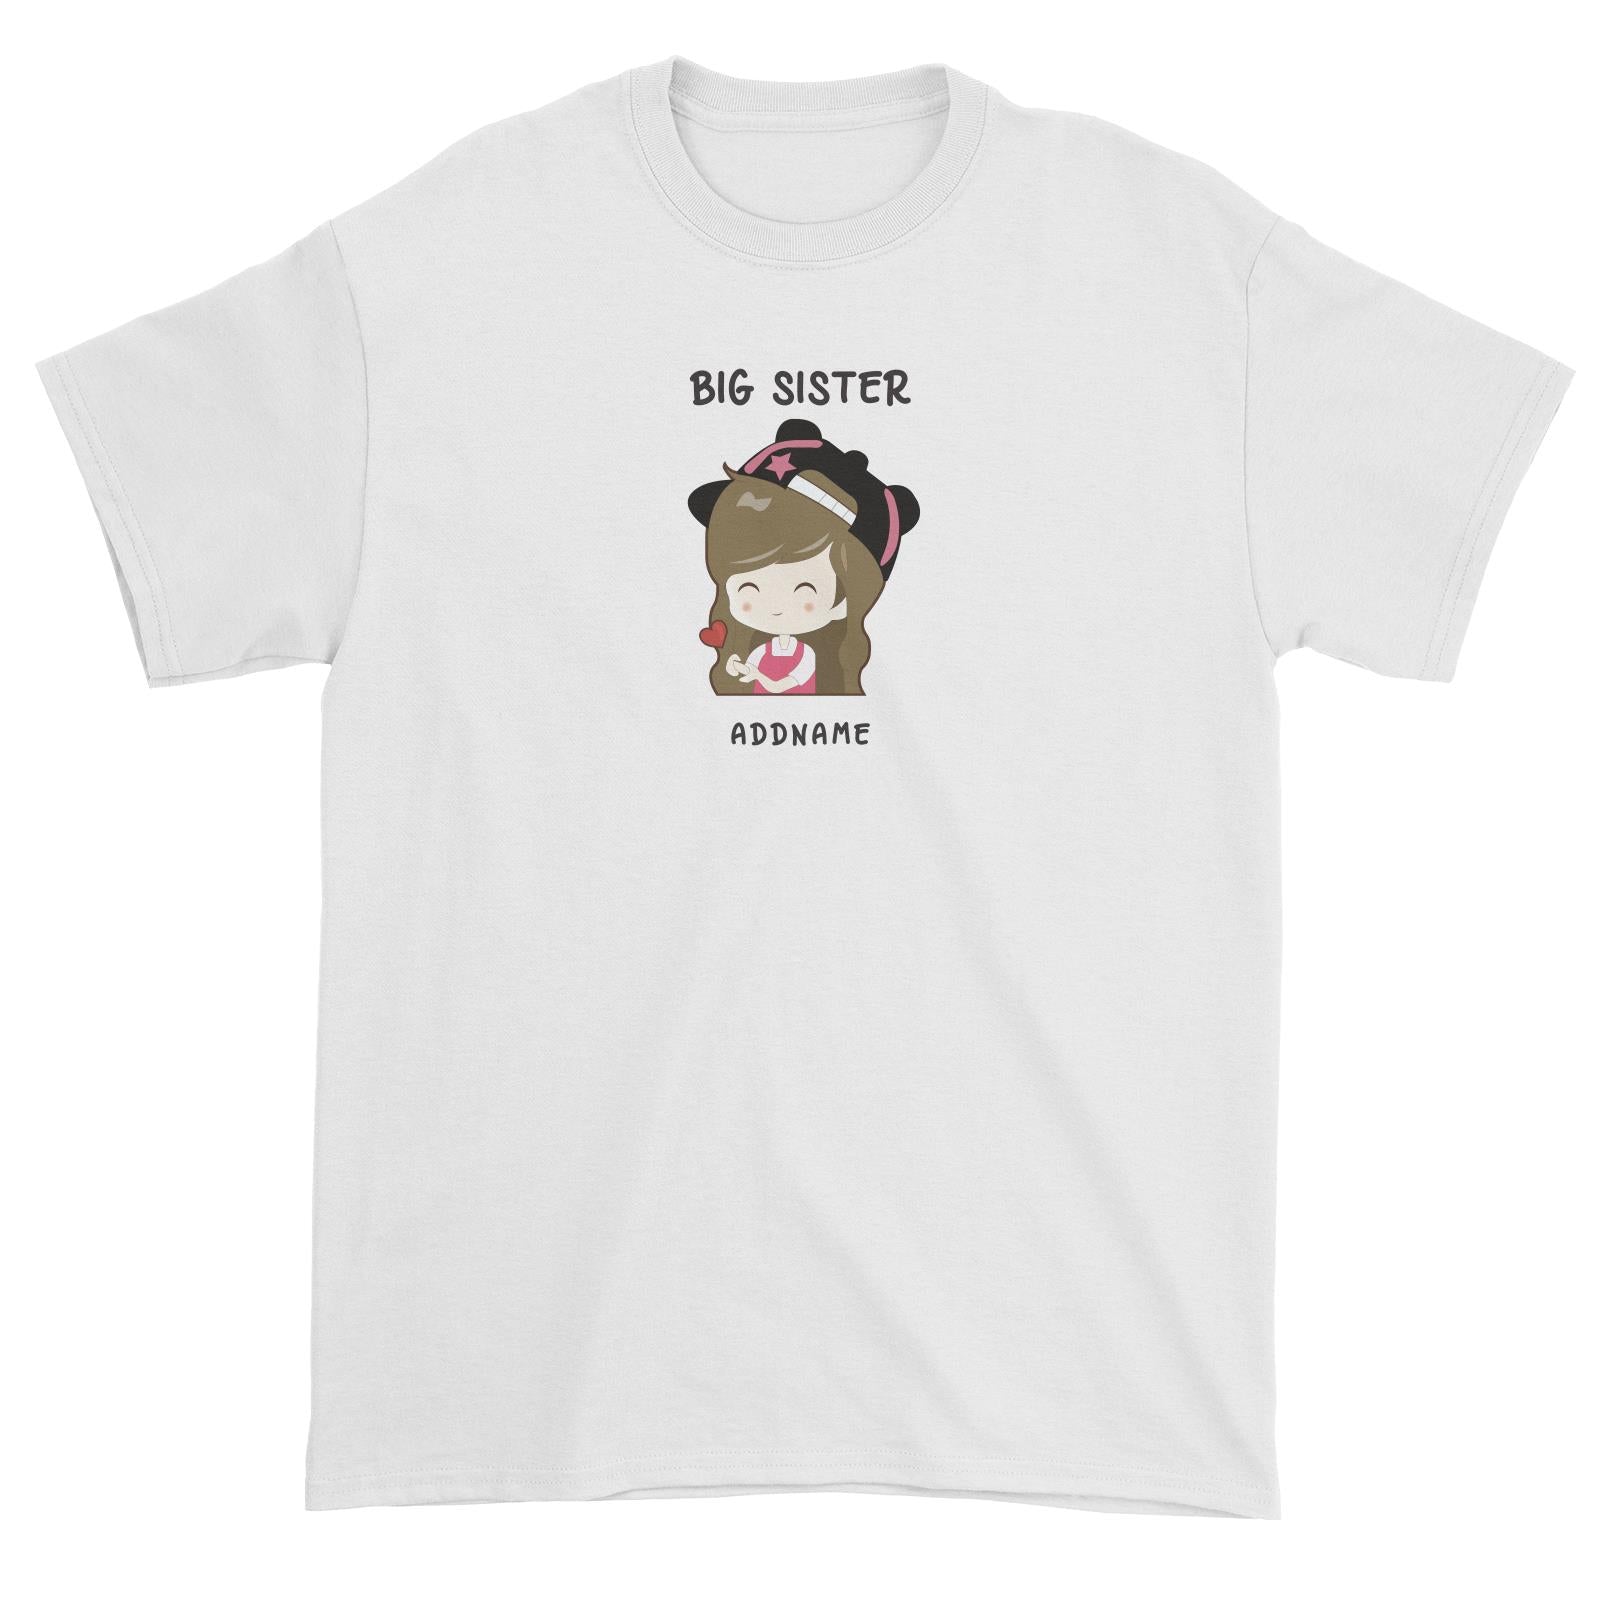 My Lovely Family Series Big Sister Addname Unisex T-Shirt (FLASH DEAL)